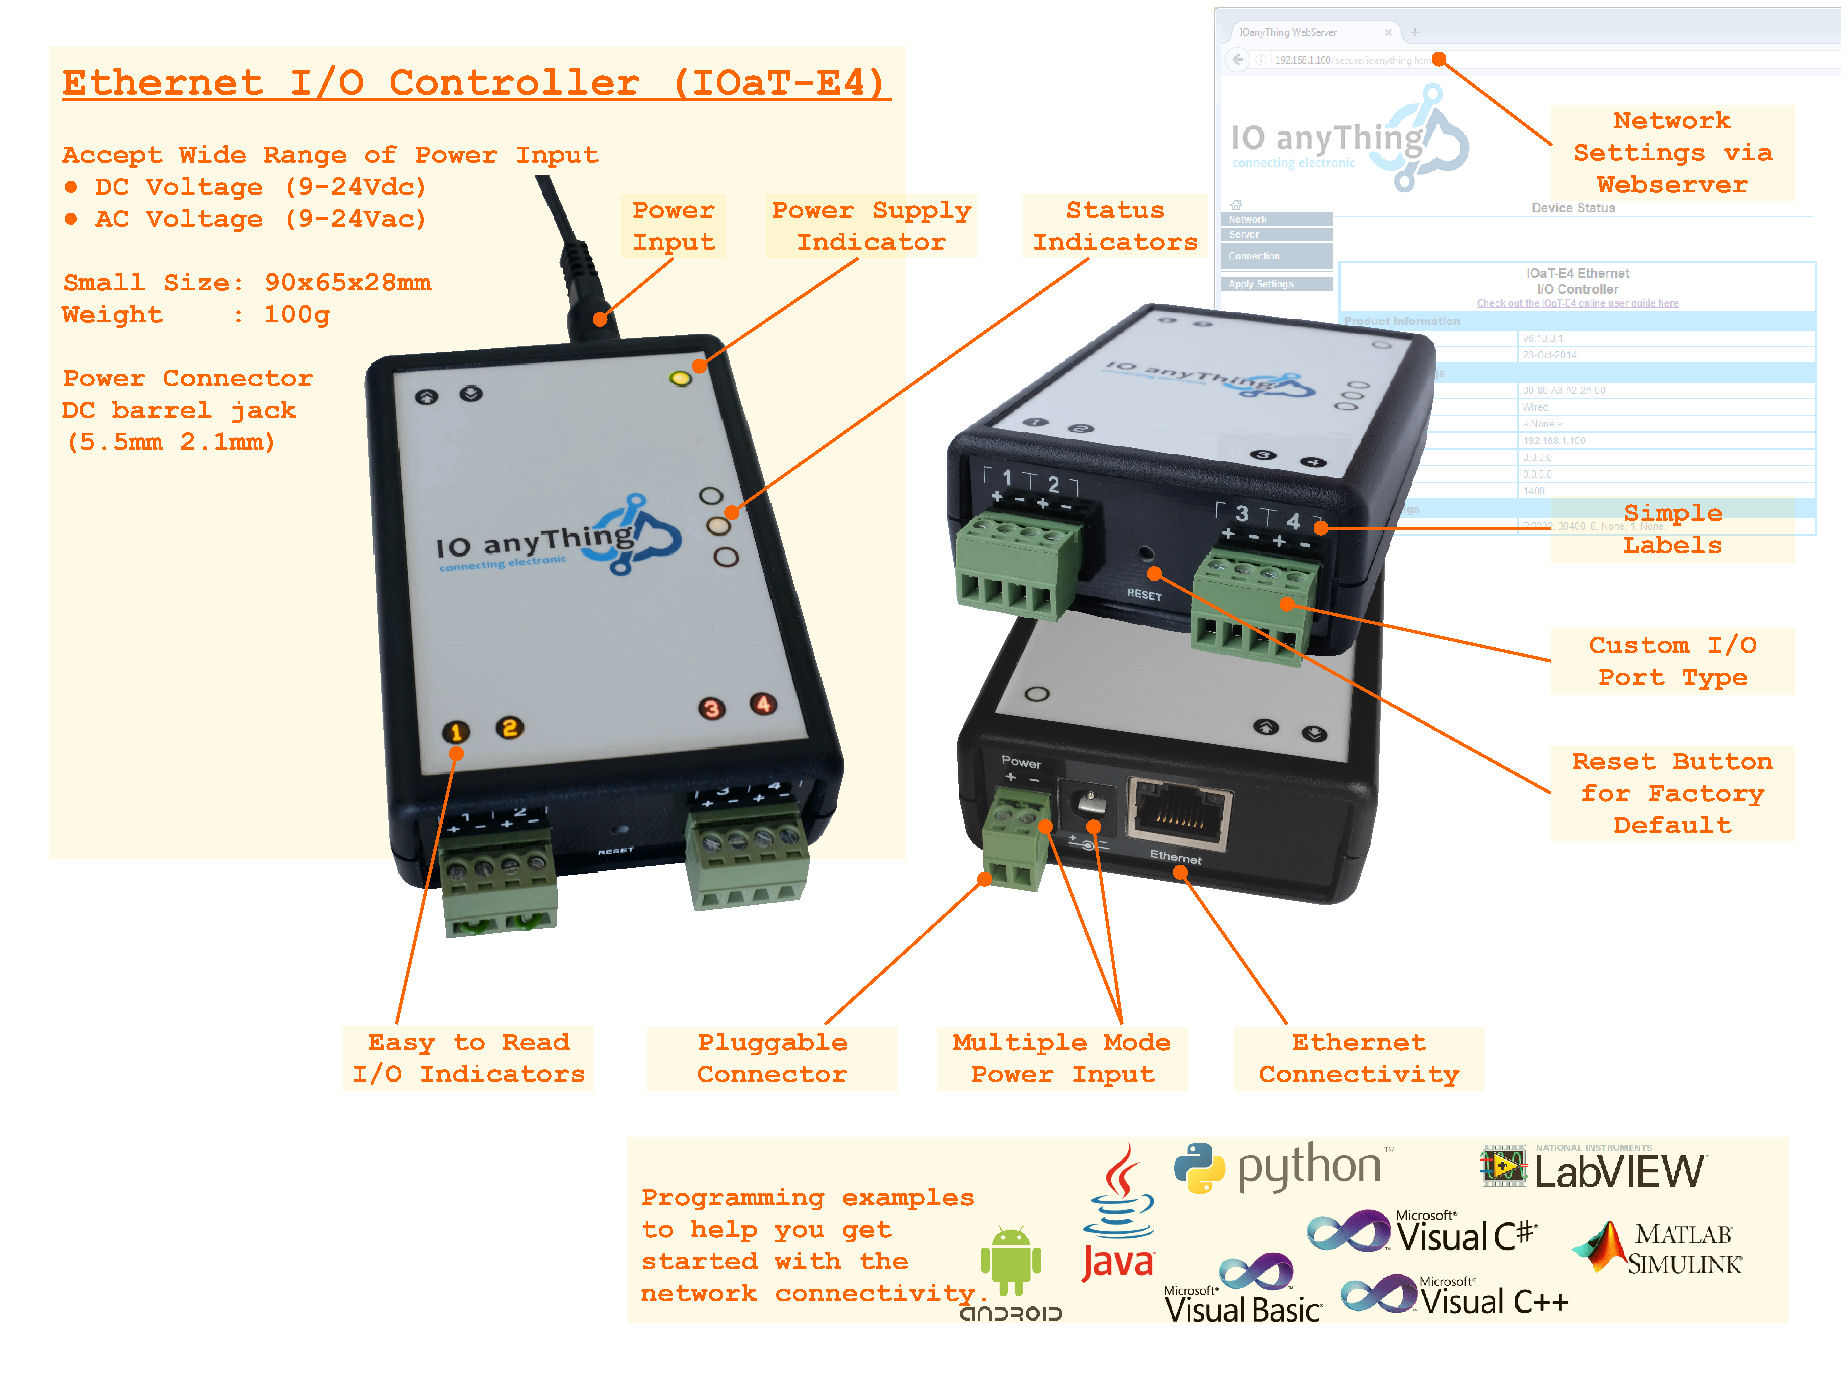 Ethernet I/O Controller, IOaT-E4 product information